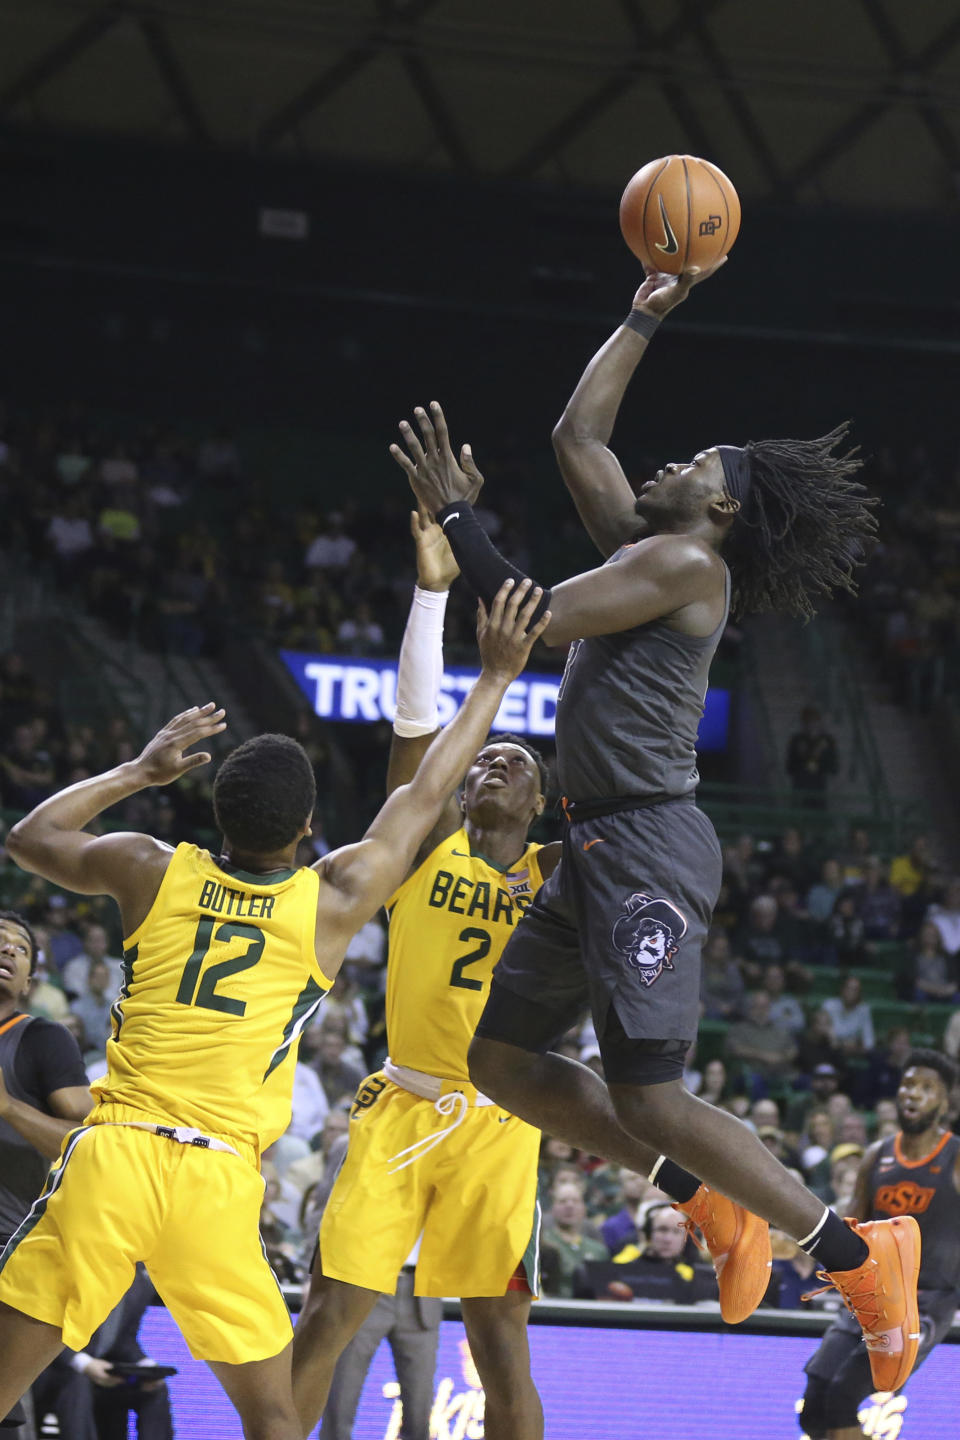 Oklahoma State guard Isaac Likekele, right, shoots over Baylor guard Jared Butler (12) during the first half of an NCAA college basketball game Saturday, Feb. 8, 2020, in Waco, Texas. (AP Photo/Rod Aydelotte)